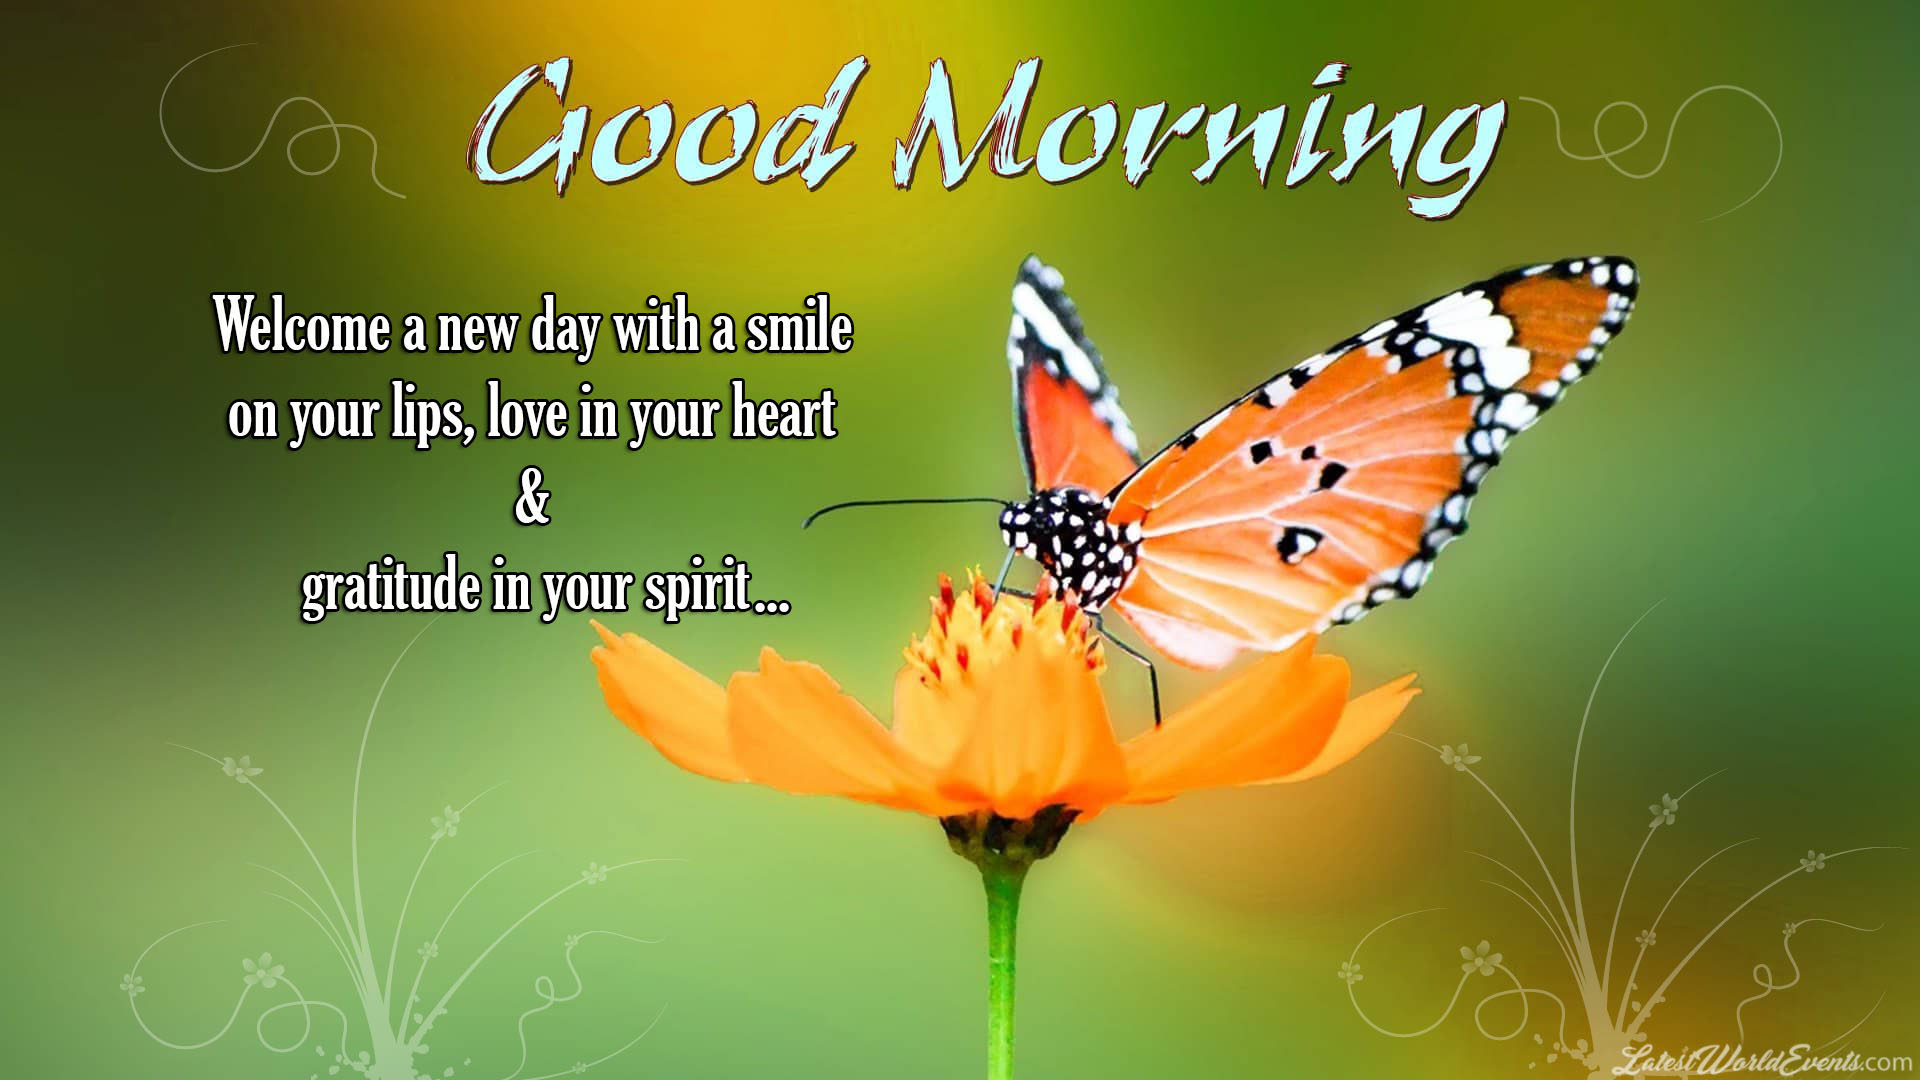 Good-morning-quotes-2018-wishes-msg-flowers-hd